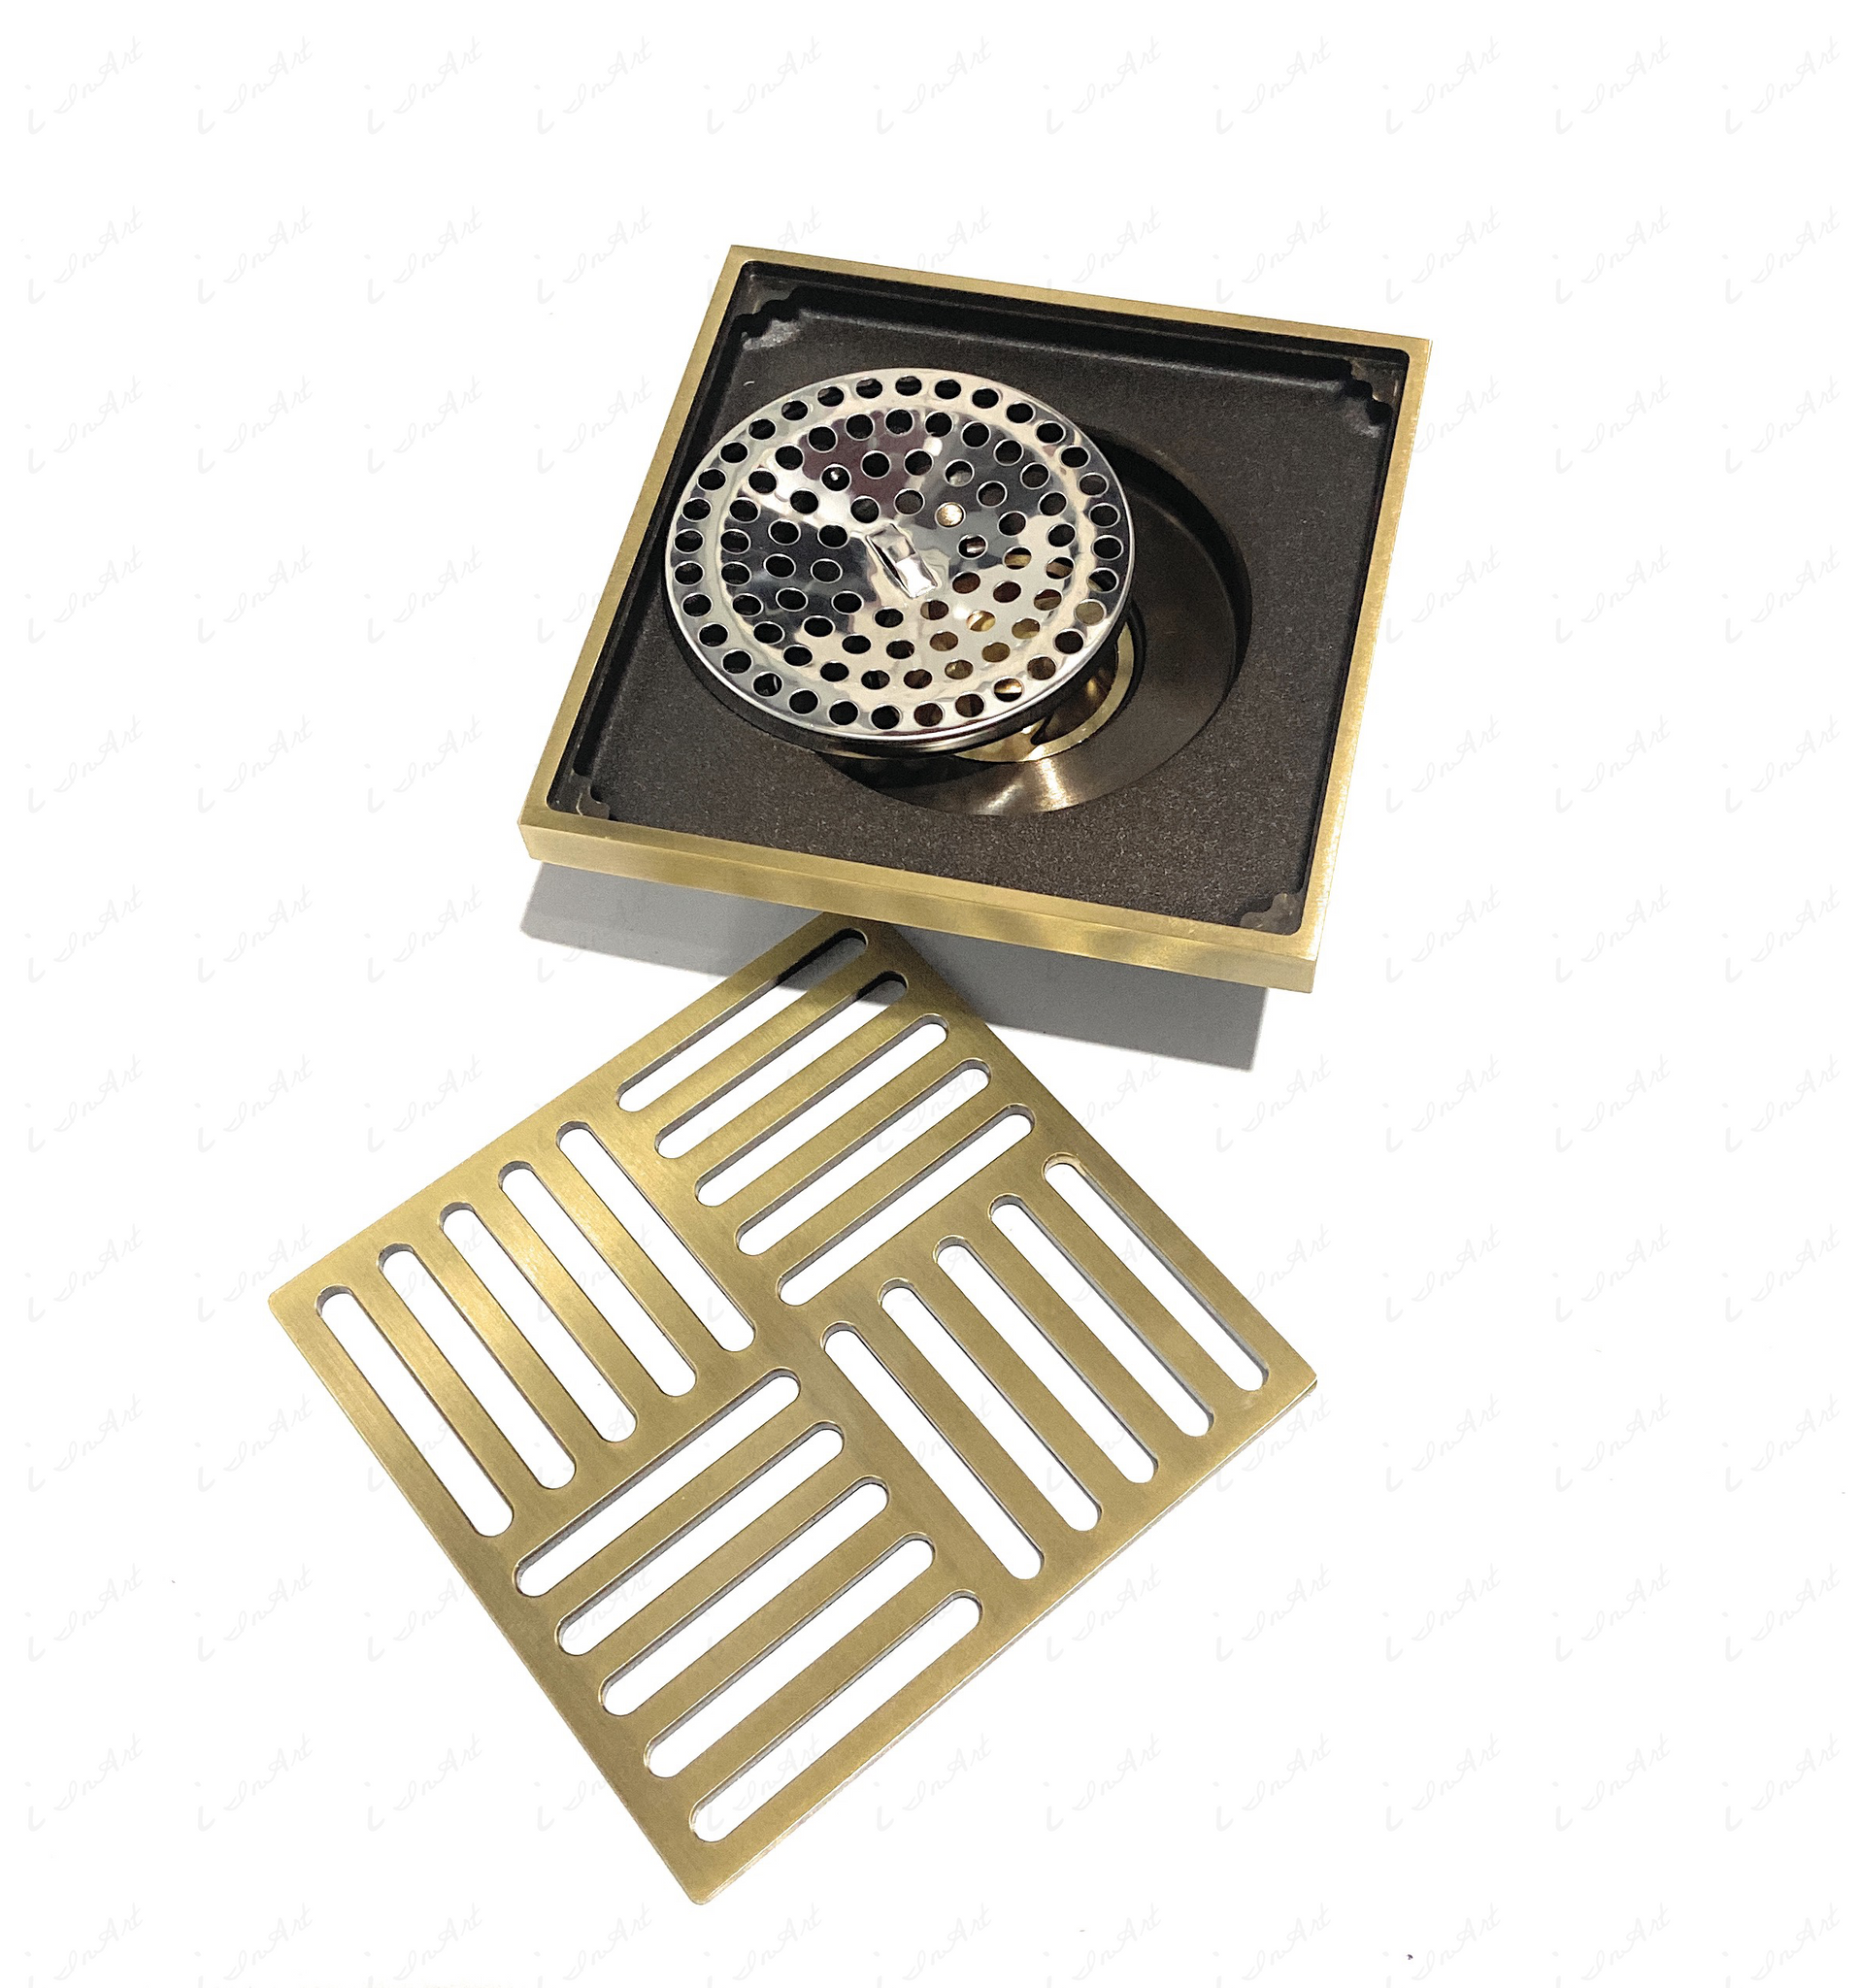 InArt Brass Square Shower Floor Drain with Removable Cover Grid Grate 5 inch Long Antique Finish